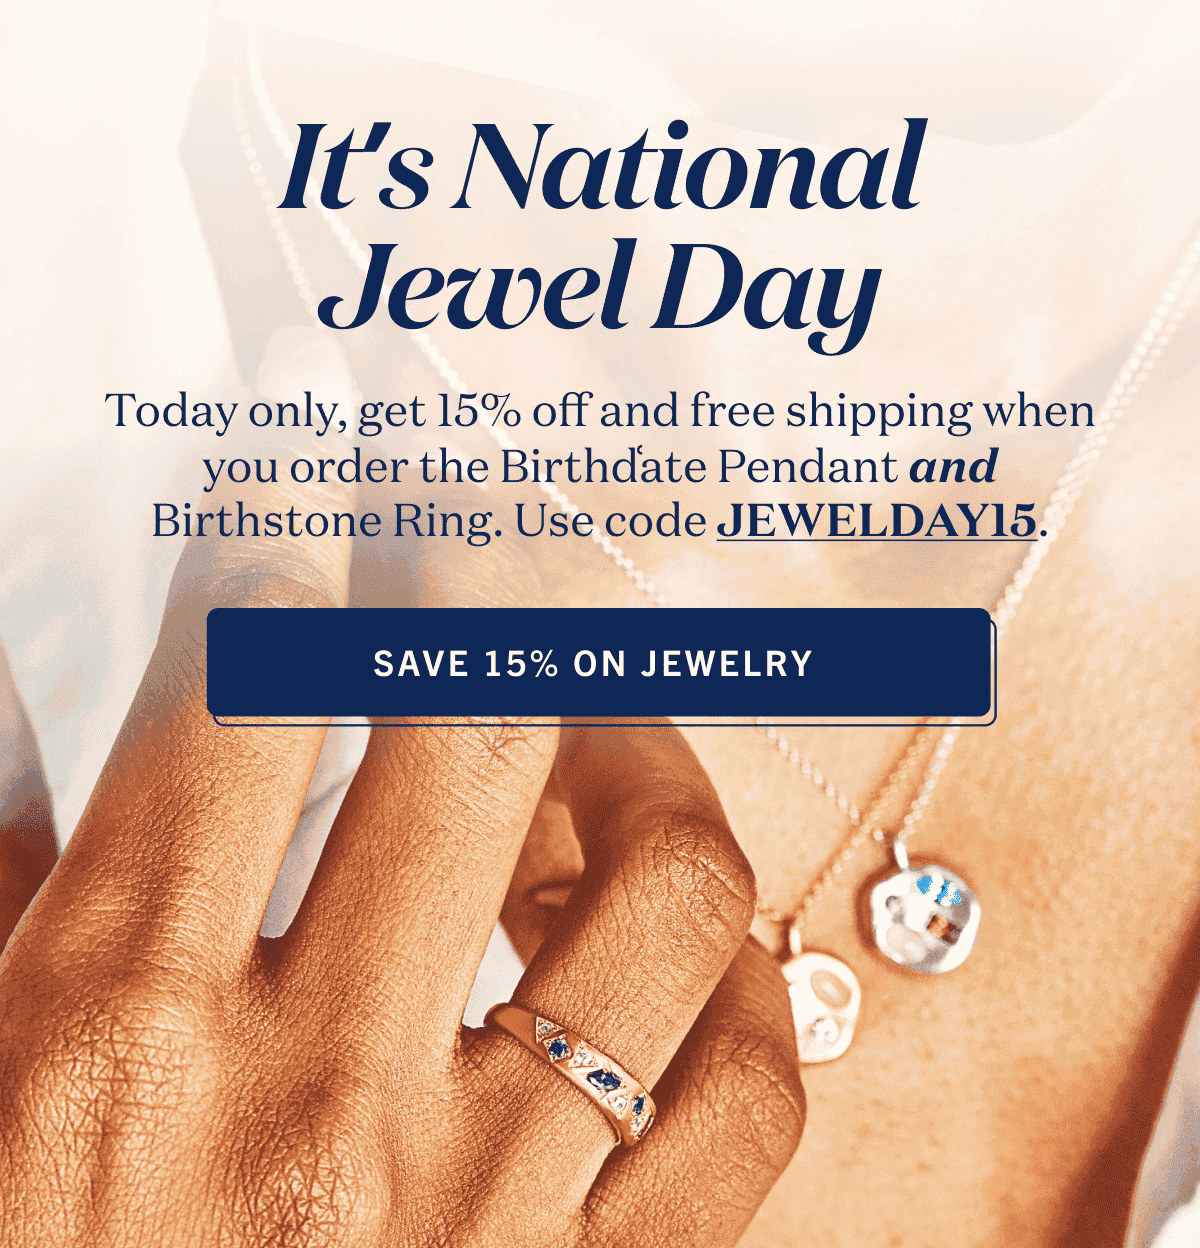 Today only, get 15% off and free shipping when you order the Birthd͑ate Pendant and Birthstone Ring. Use code JEWELDAY15.